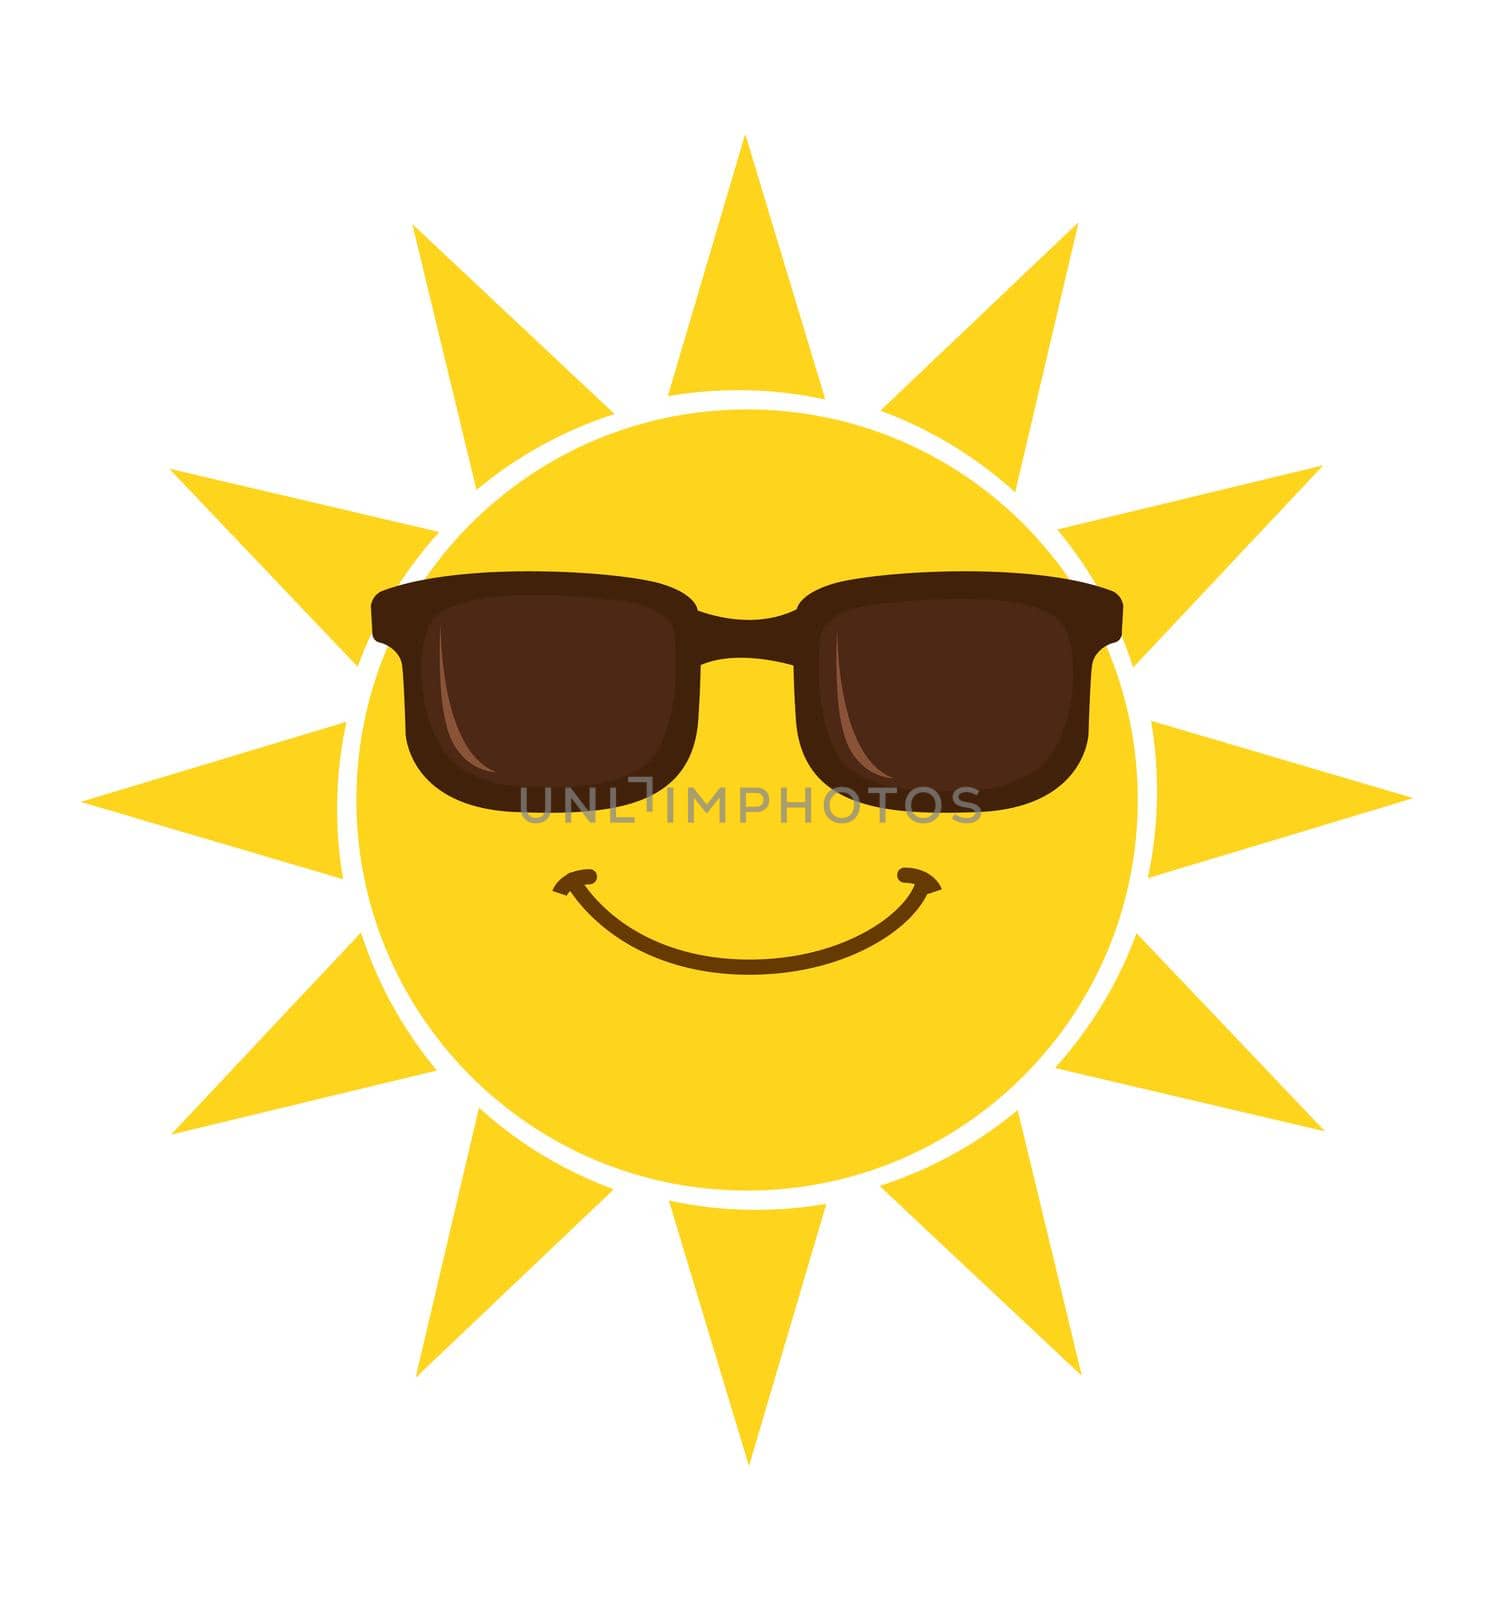 Summer sun smiling face with sunglasses vector illustration isolated on white background by Esfir98